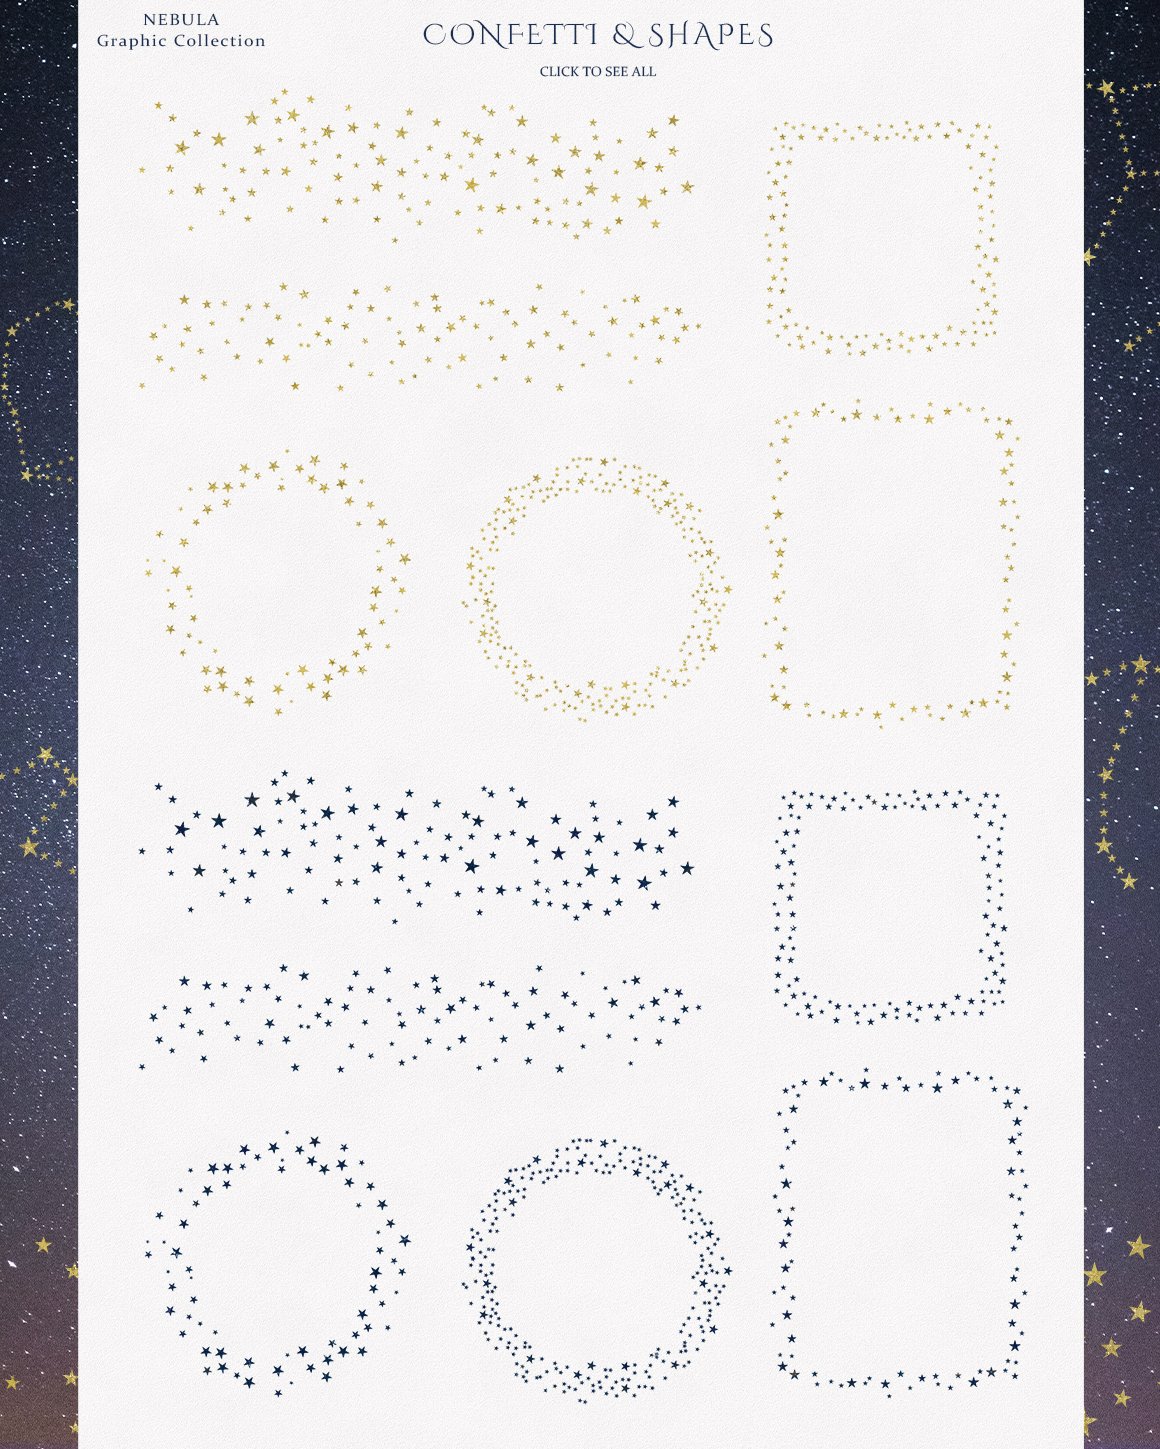 Zodiac Constellations & Moon Phases